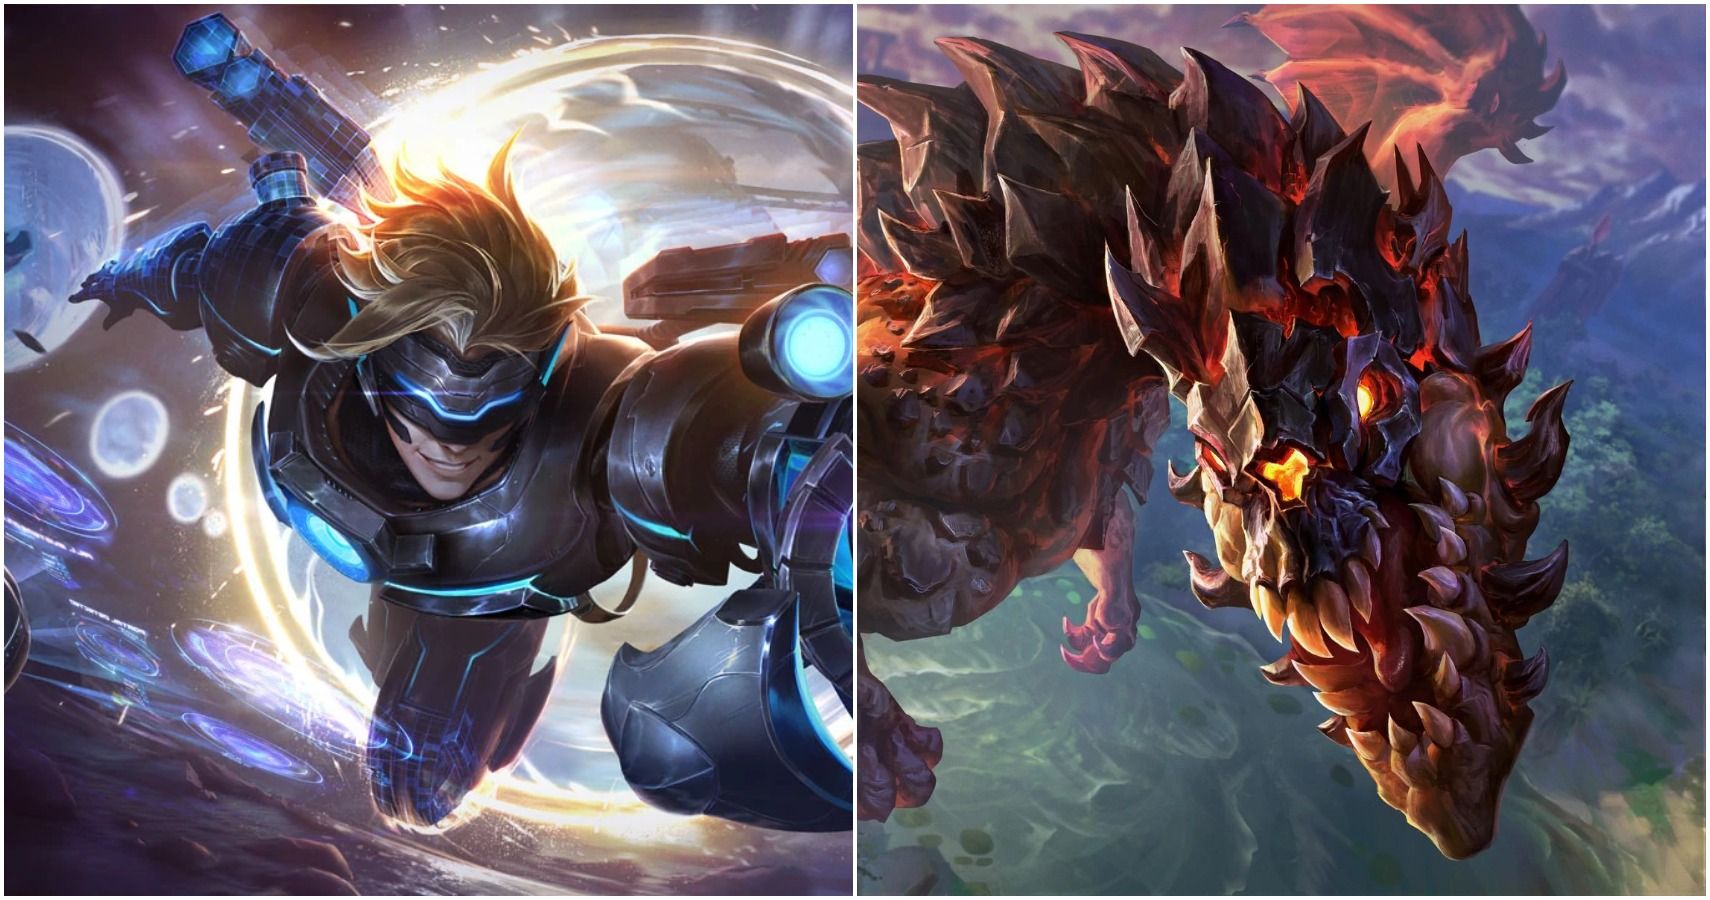 Splash art of Pulsefire Ezreal and the fire dragon from League of Legends